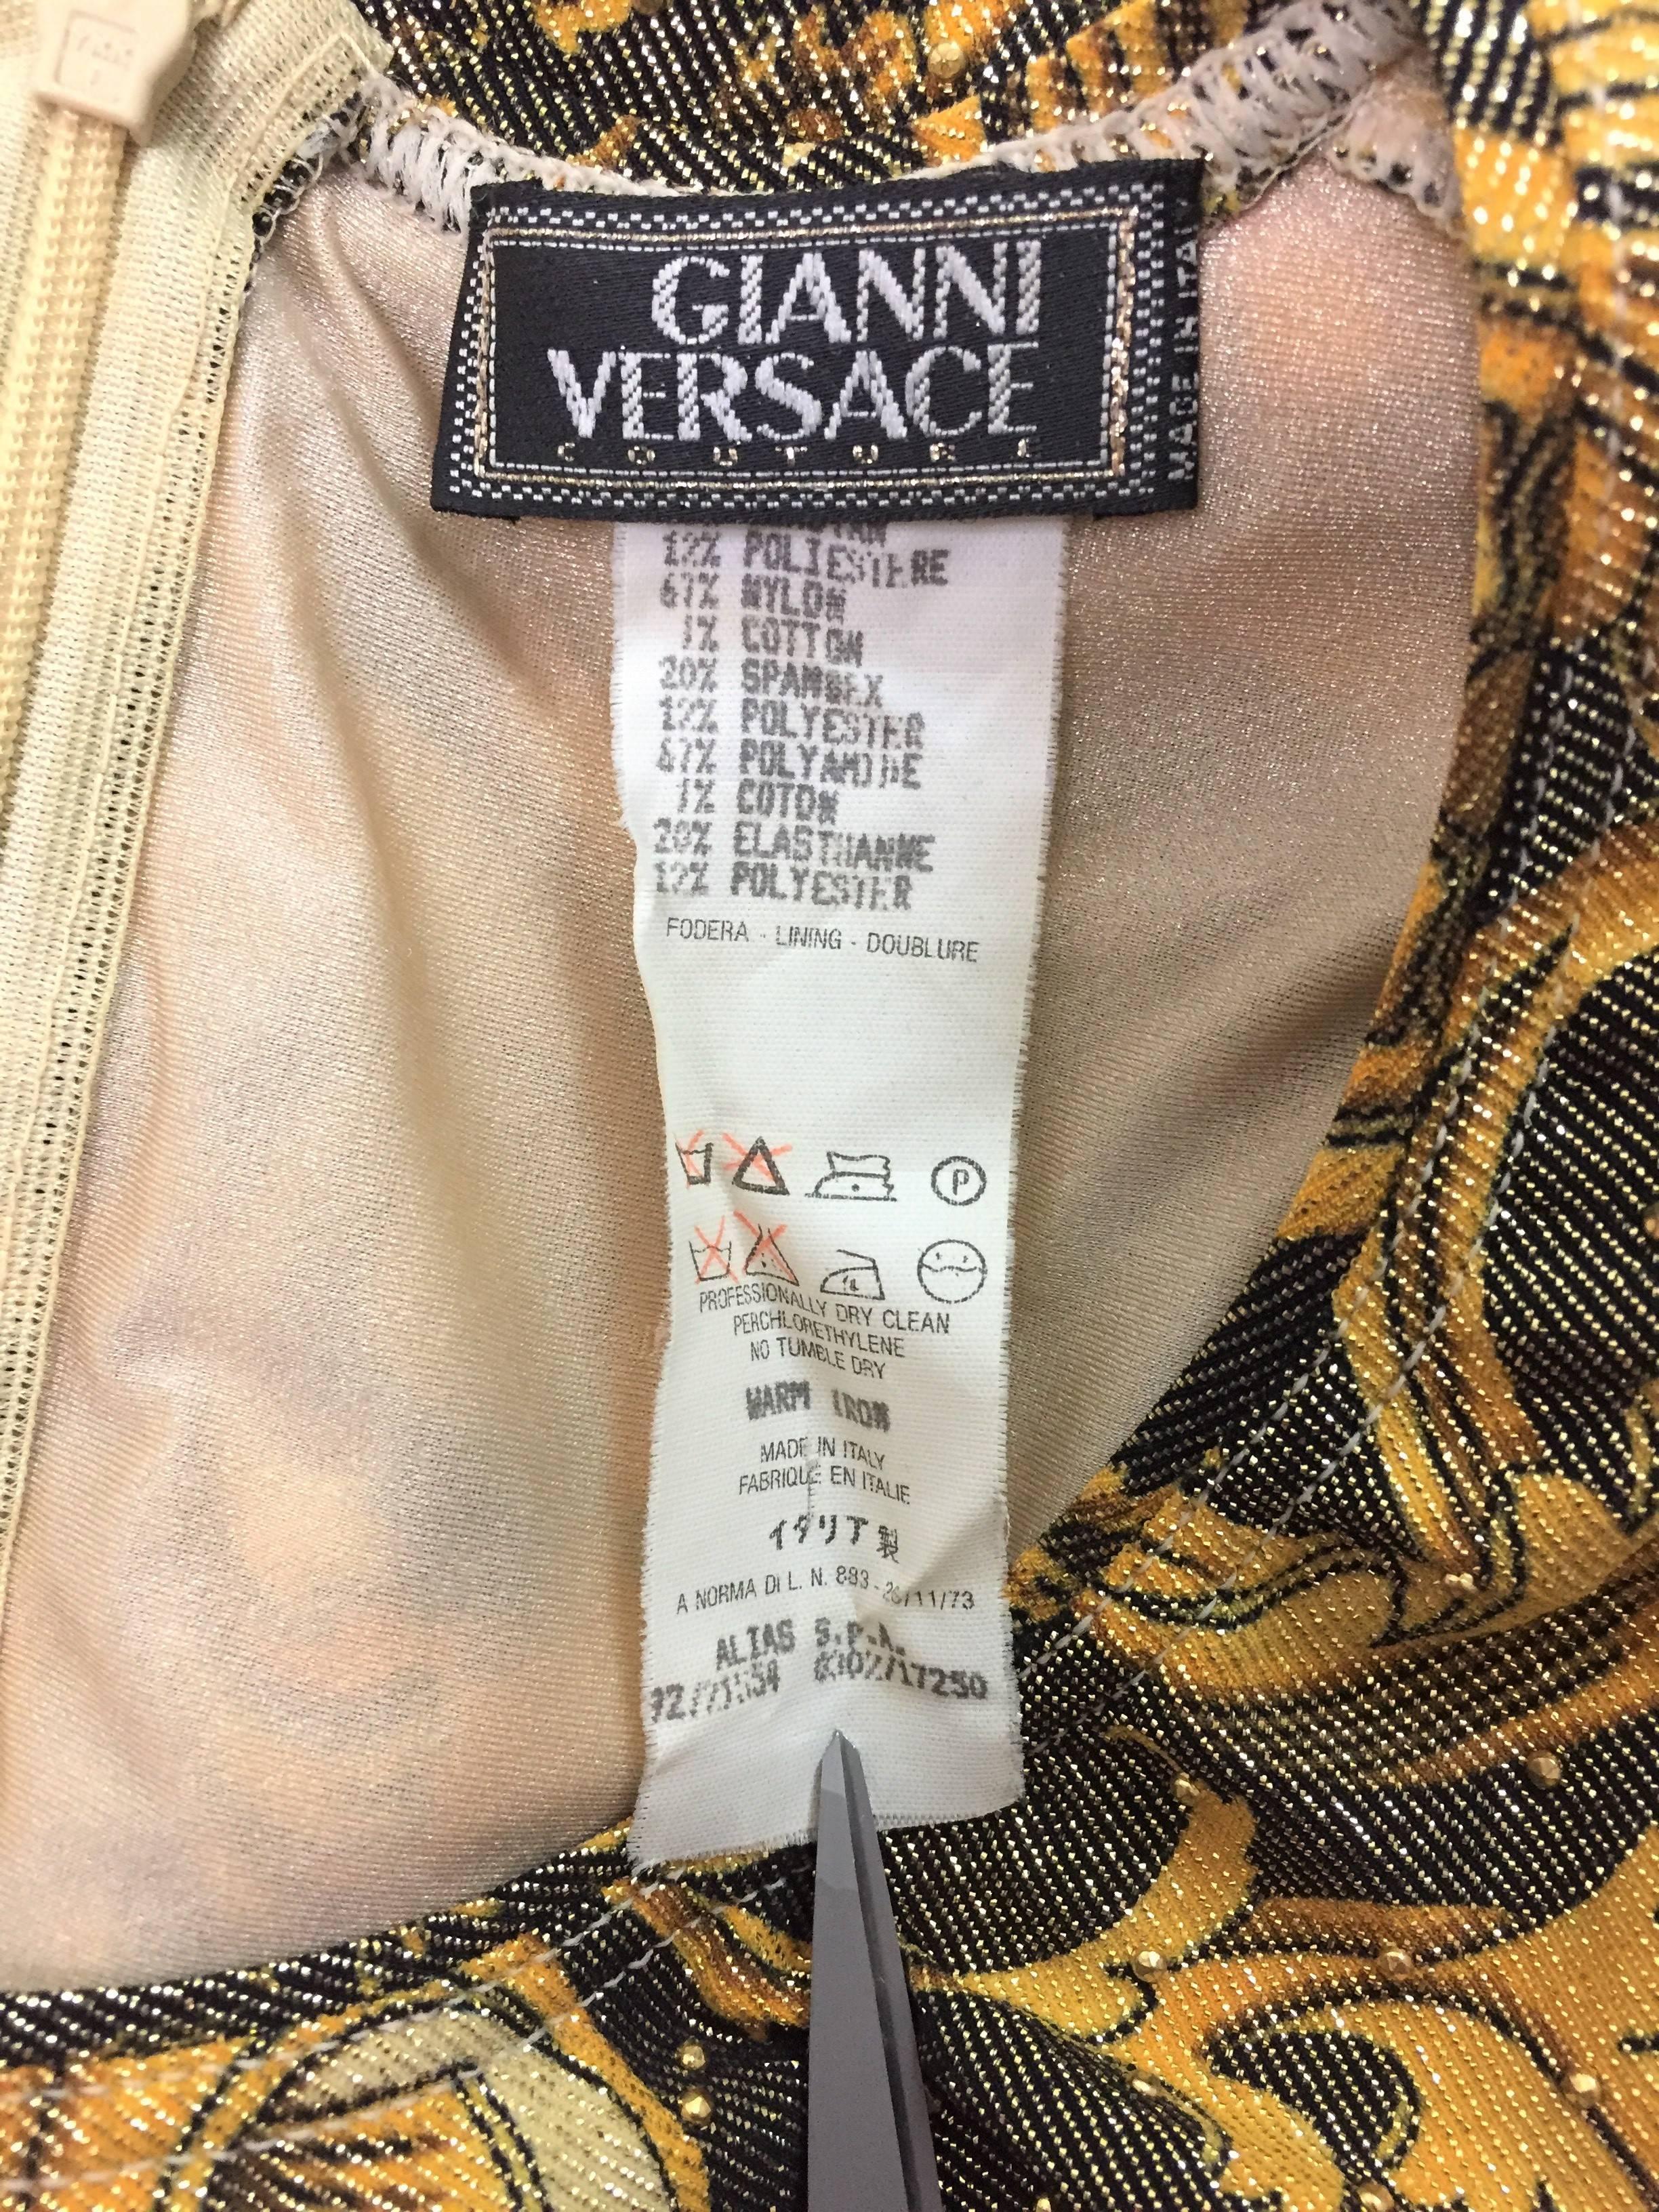 S/S 1992 Gianni Versace Atelier Print Gold Studded Baroque Top In Good Condition In Yukon, OK